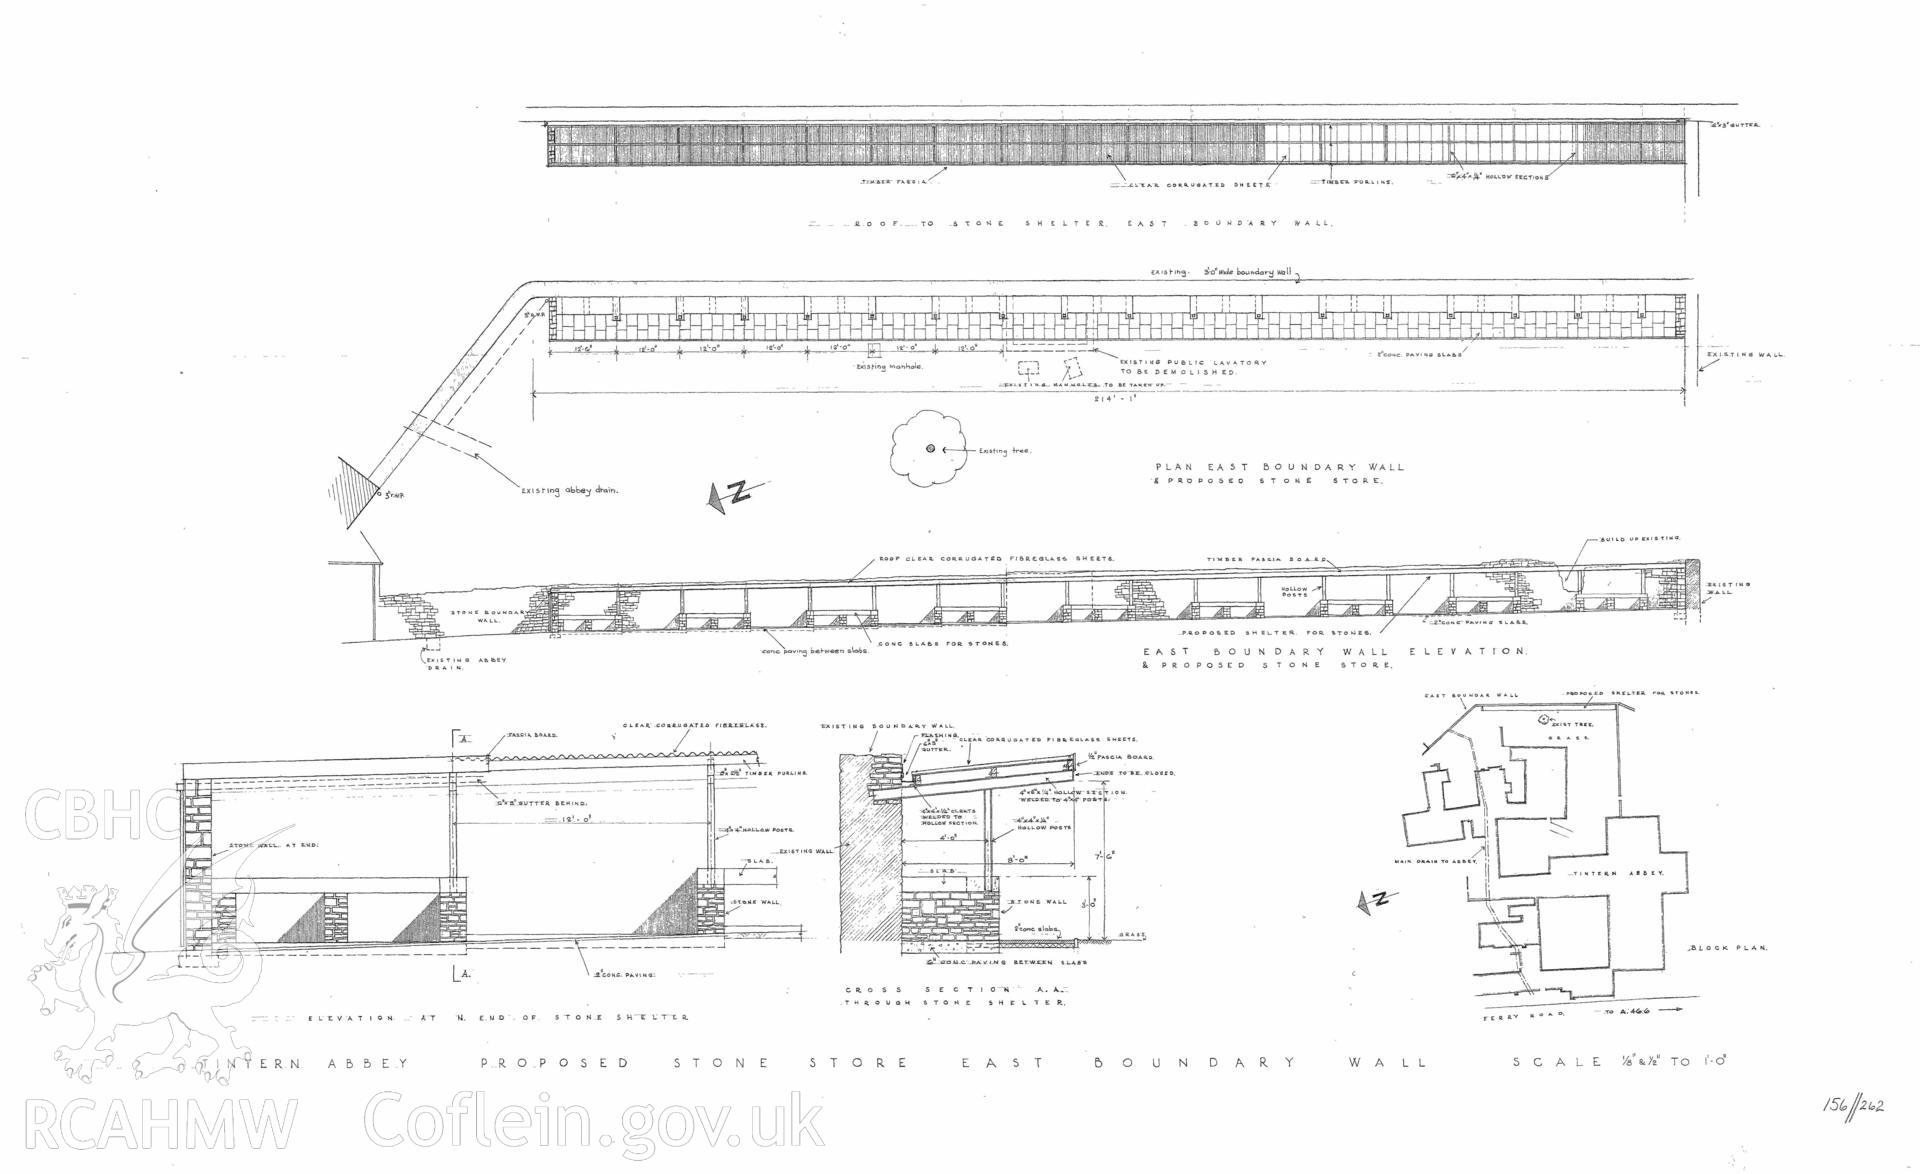 Cadw guardianship monument drawing of Tintern Abbey. Proposed stone store E boundary wall. Cadw ref. No. 156//262. Scale 1:96;12.